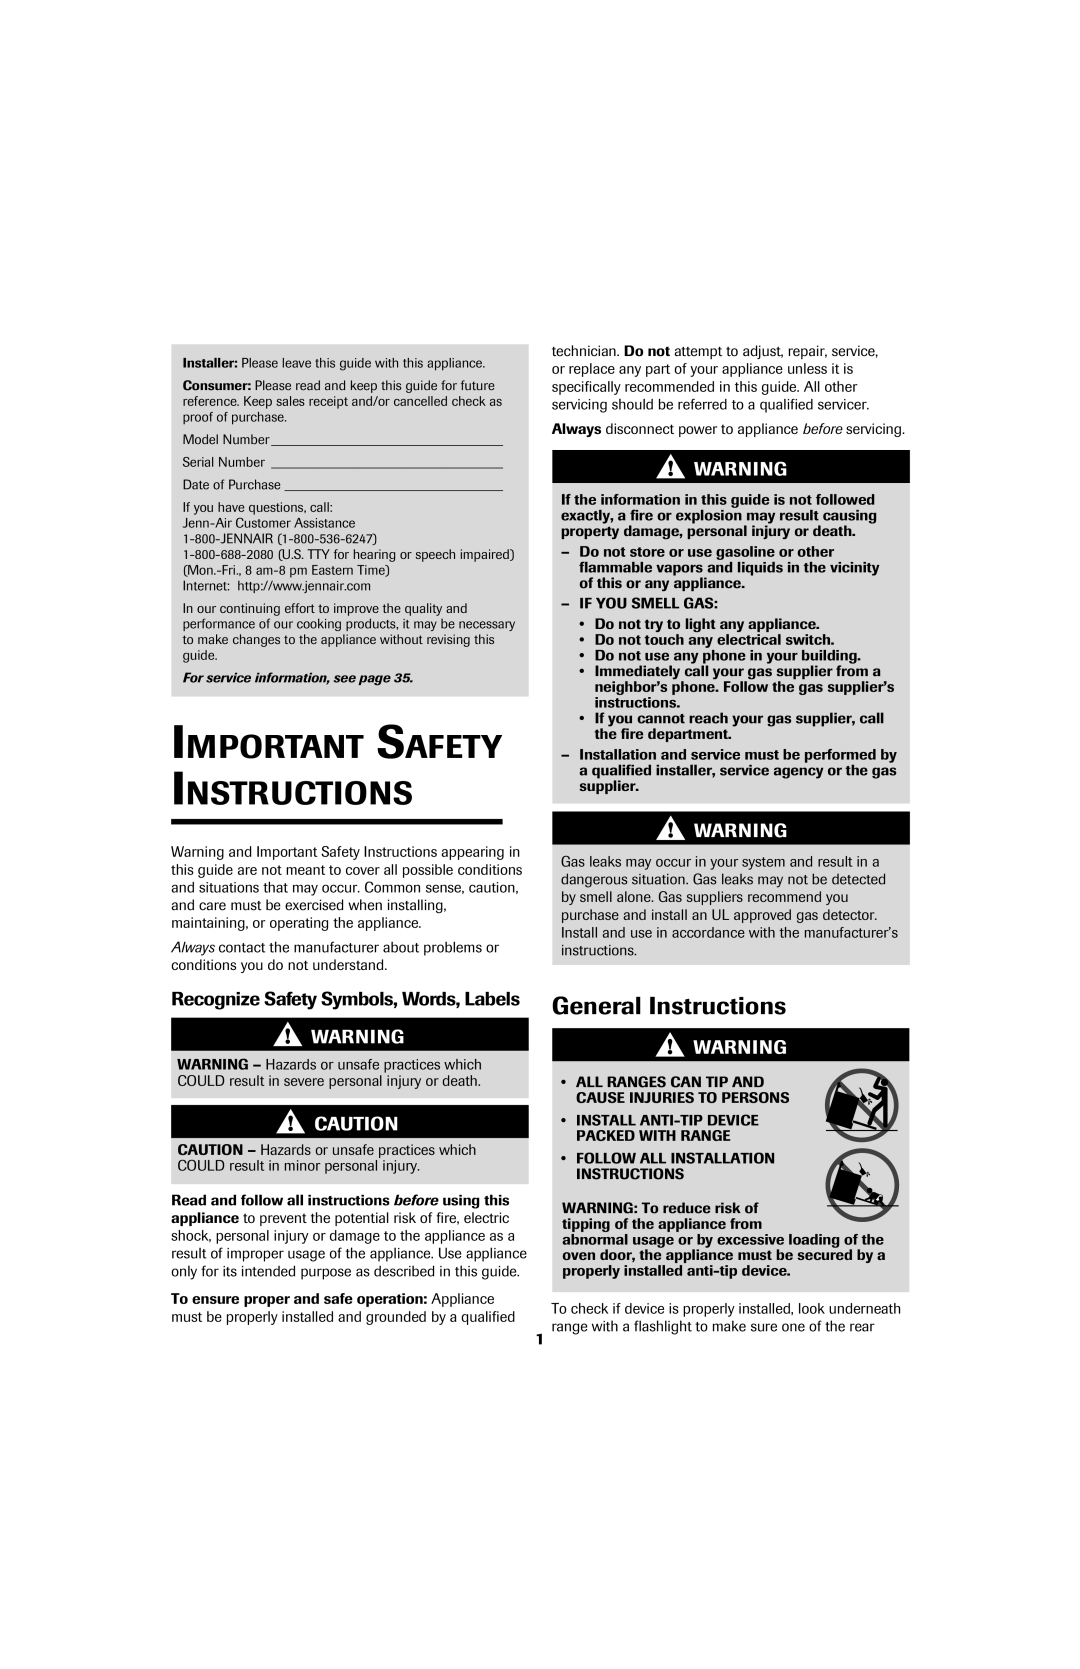 Jenn-Air 8113P753-60 General Instructions, Recognize Safety Symbols, Words, Labels, Important Safety Instructions 